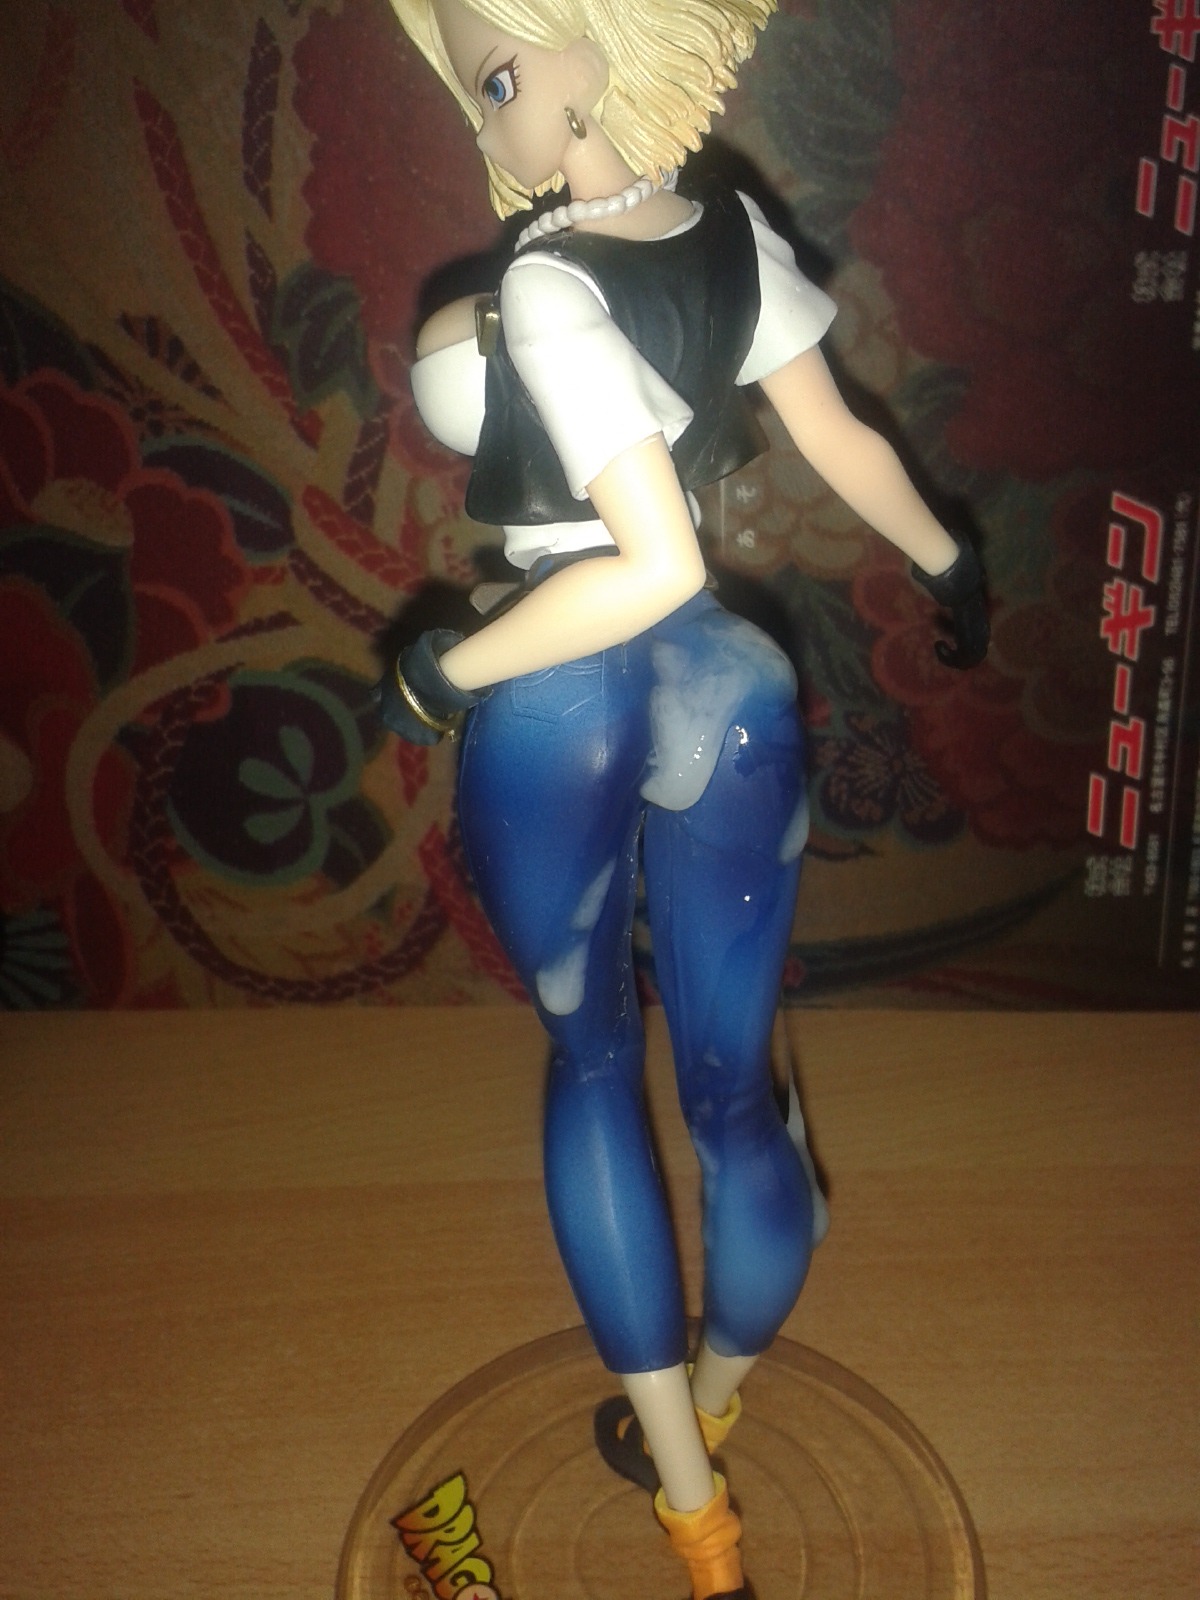 &ldquo;Ass&rdquo; requested: Some more Android 18 SOF (Booty) Love! I did